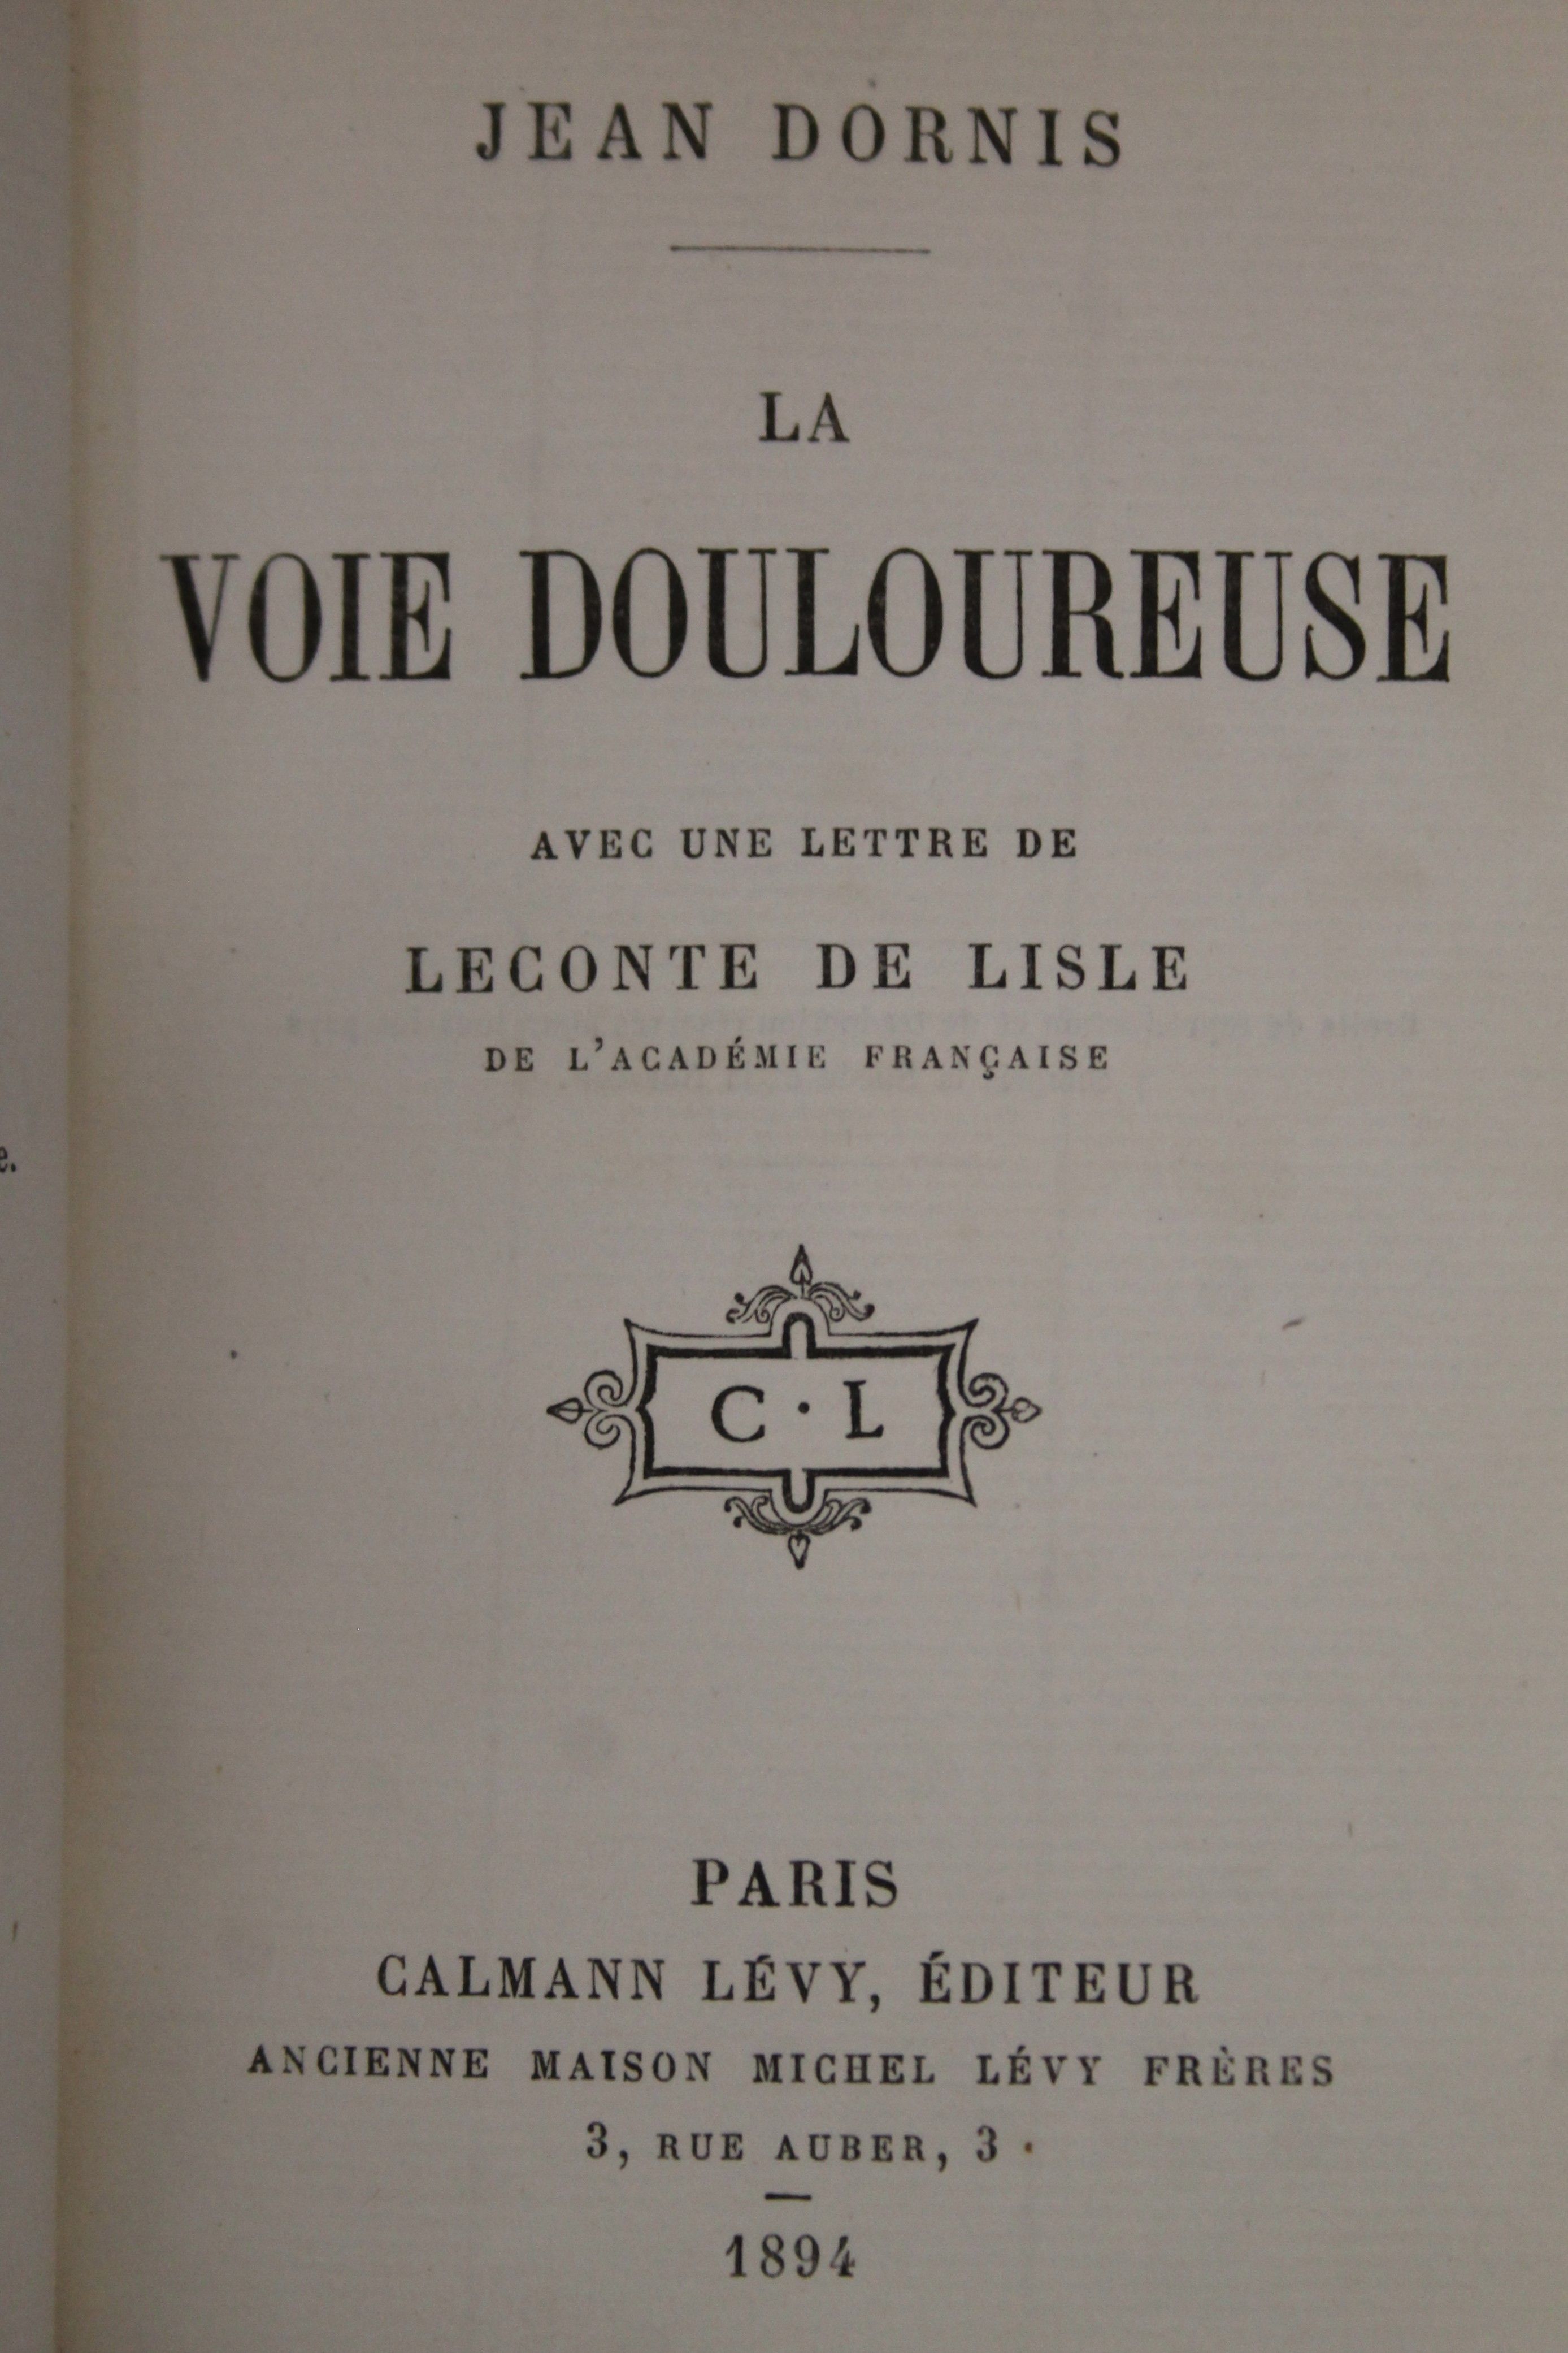 Dornis (Jean), La Voie Douloureuse, first edition, authors full book, signed presentation copy, - Image 6 of 34